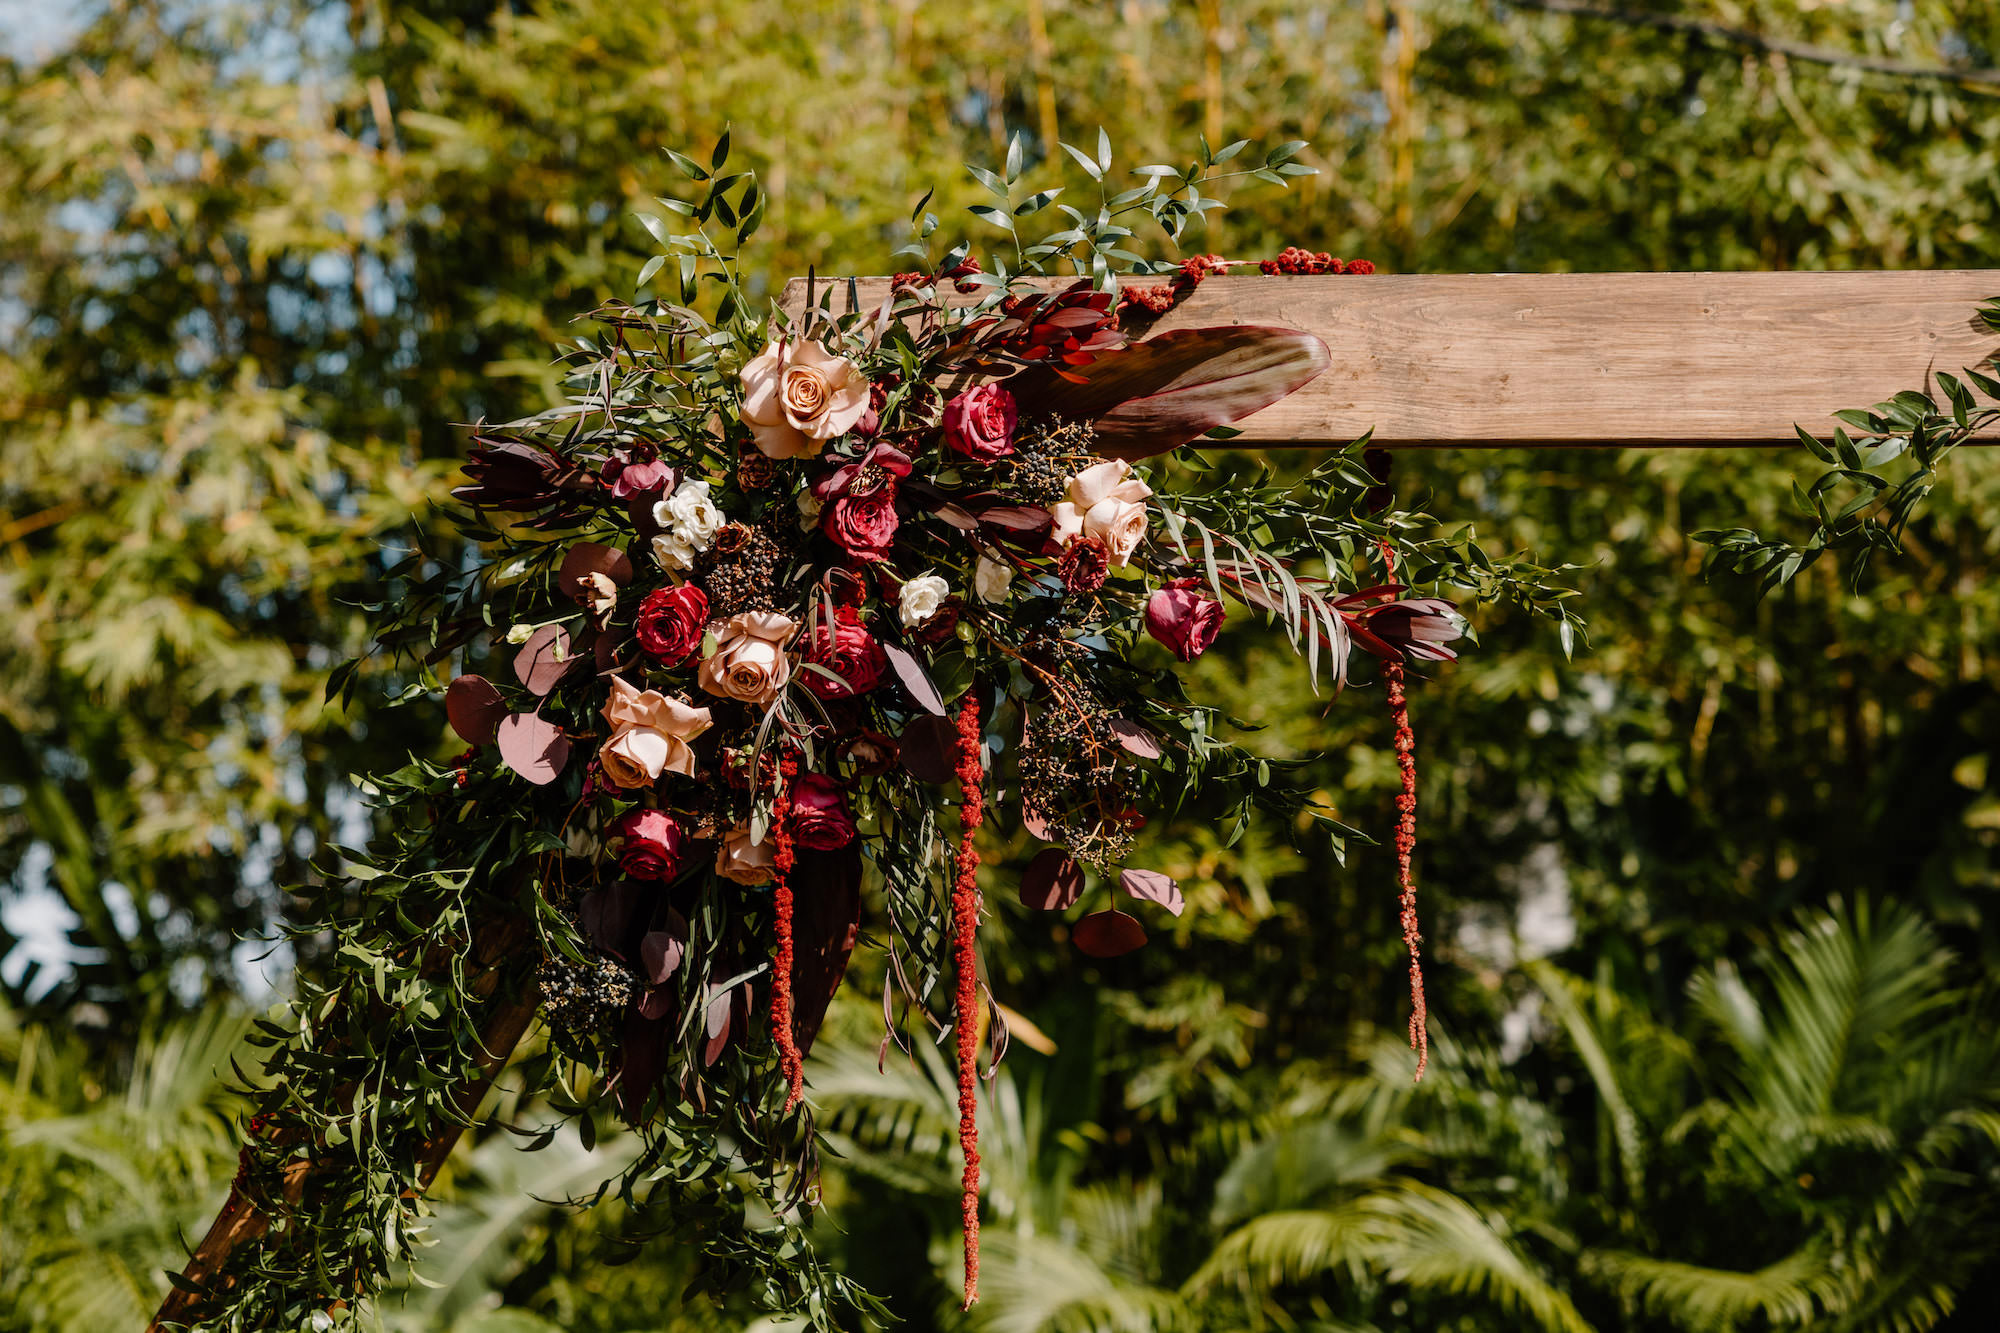 Dark and Moody Gothic Wedding Ceremony Arch with Red, Maroon, Blush and White Floral Arrangements with Greenery